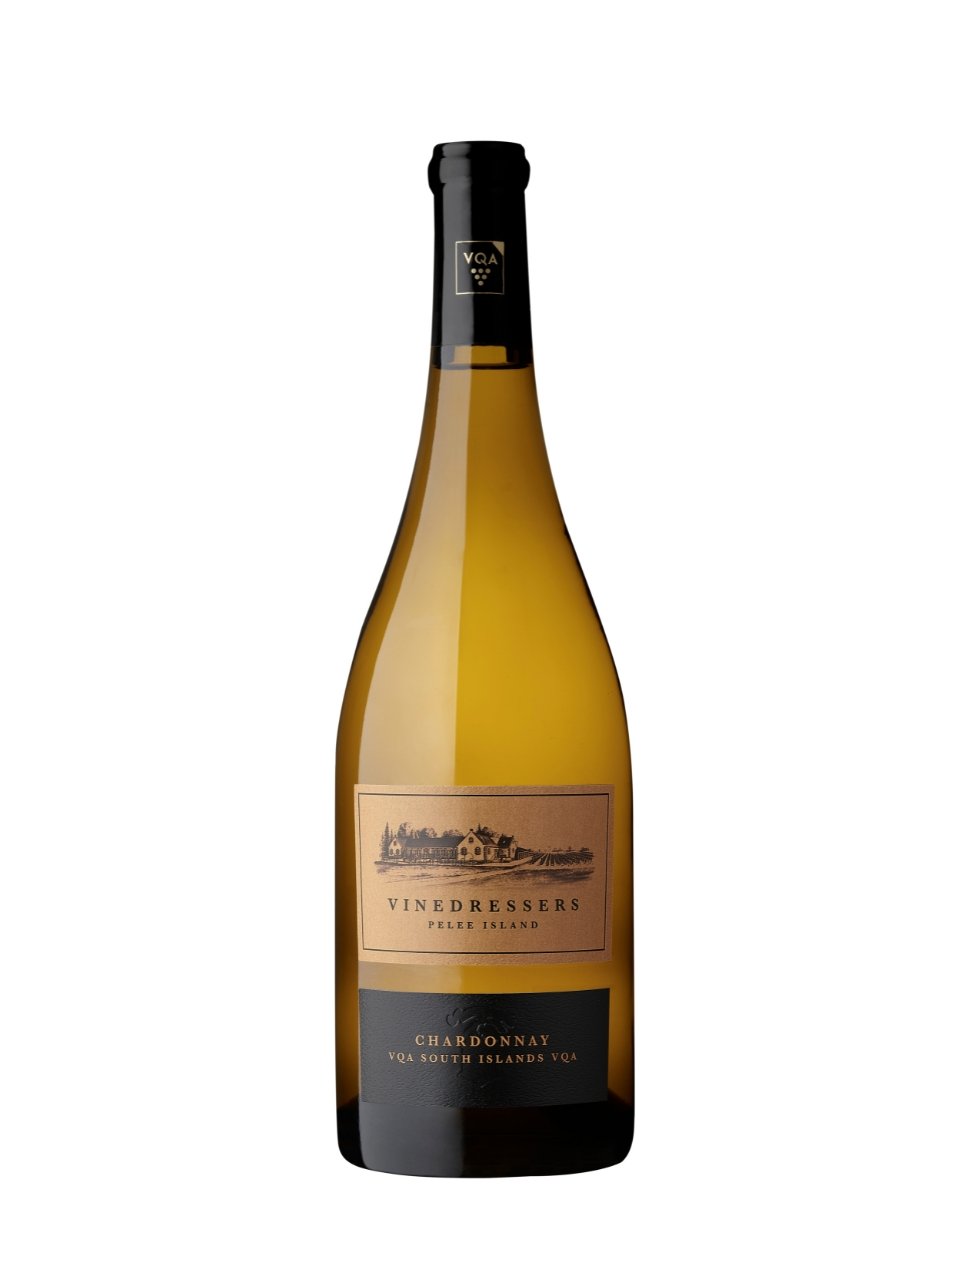 Vinedressers Chardonnay | Exquisite Wine & Alcohol Gift Delivery Toronto Canada | Vyno